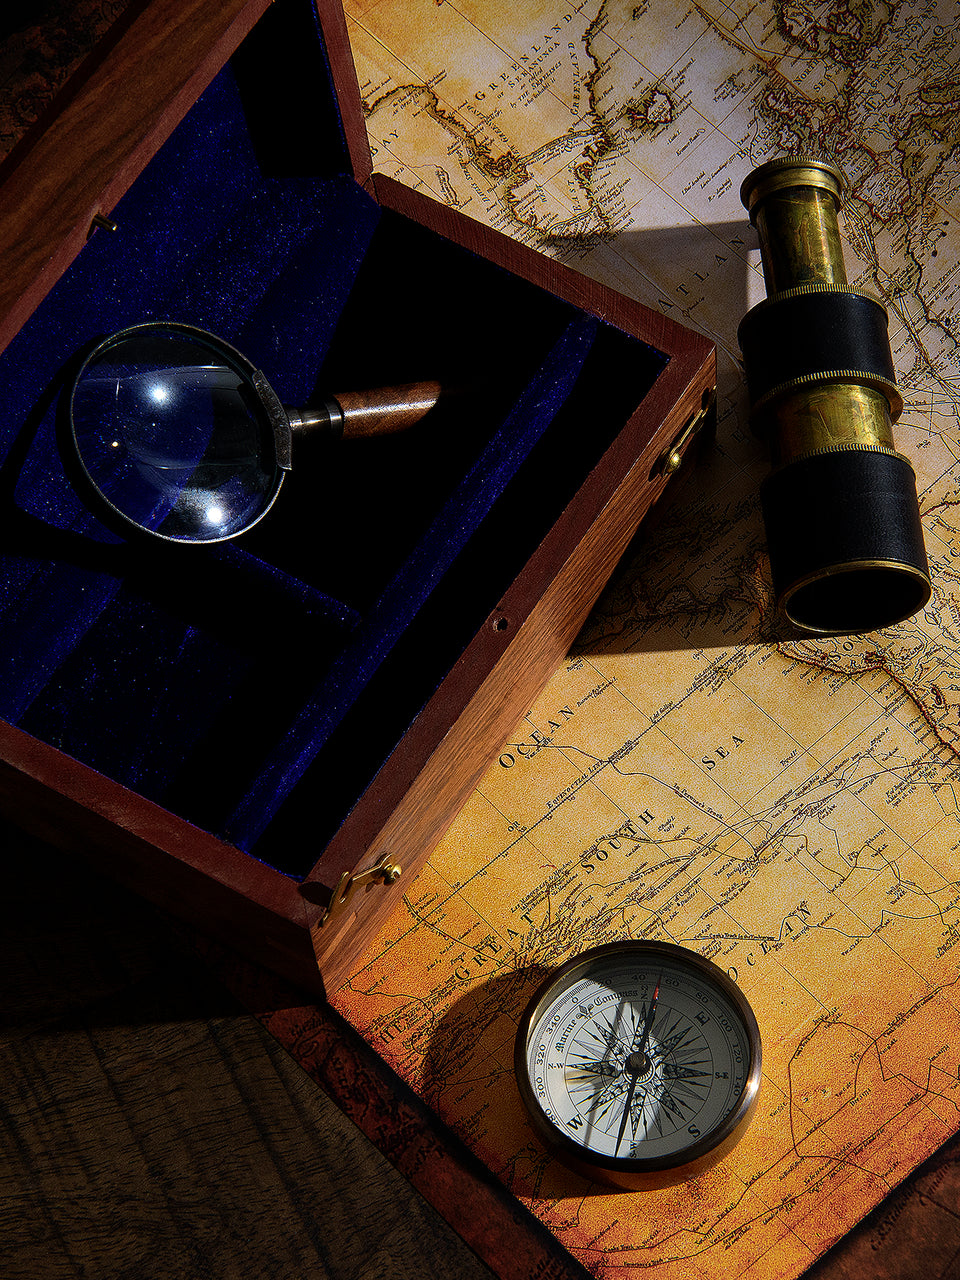 Wooden Box with Antique Telescope, Compass, and Magnifying Glass